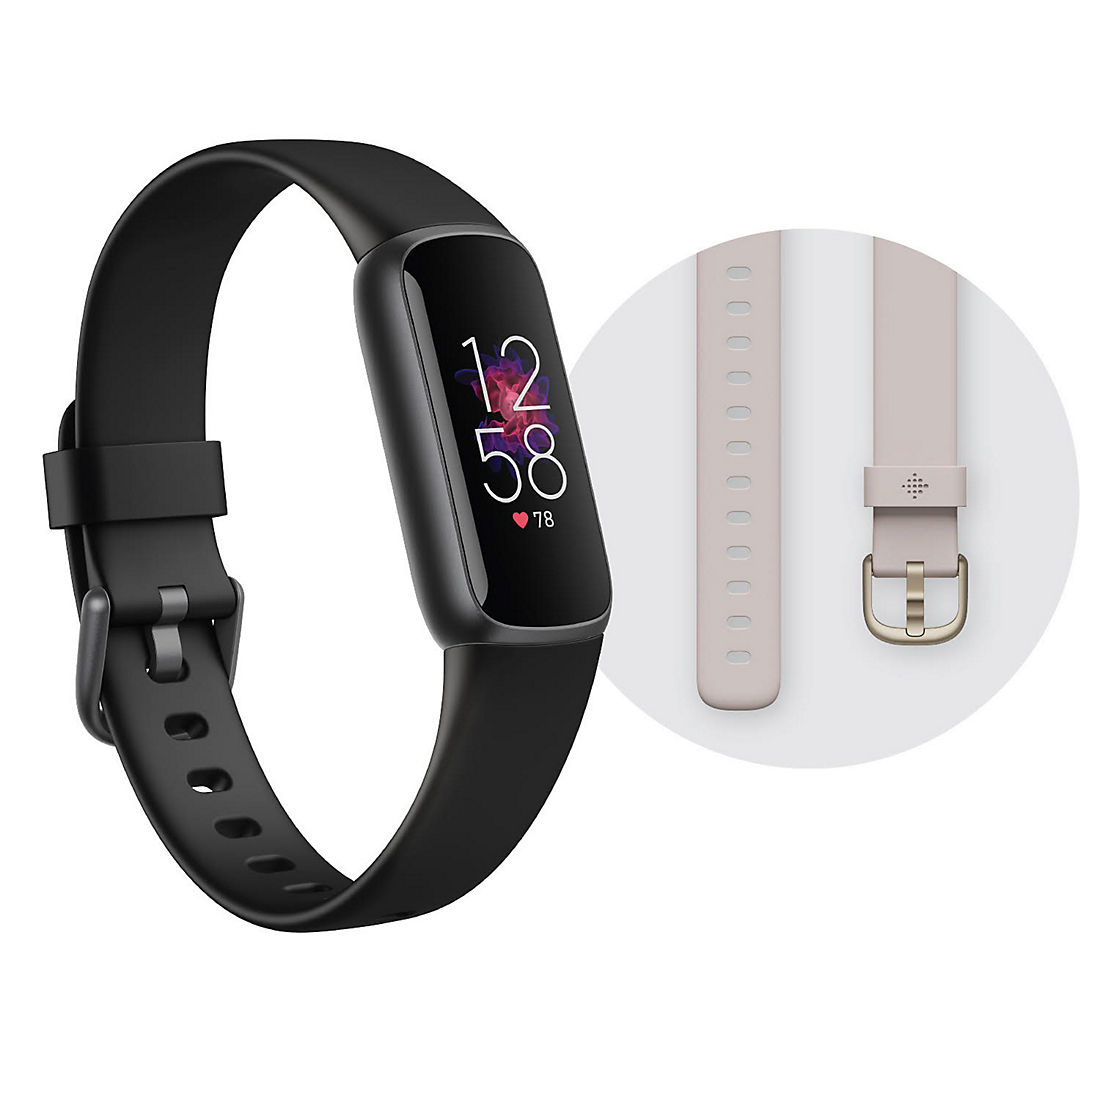 Fitbit Luxe Fitness and Wellness Tracker Bundle - Black